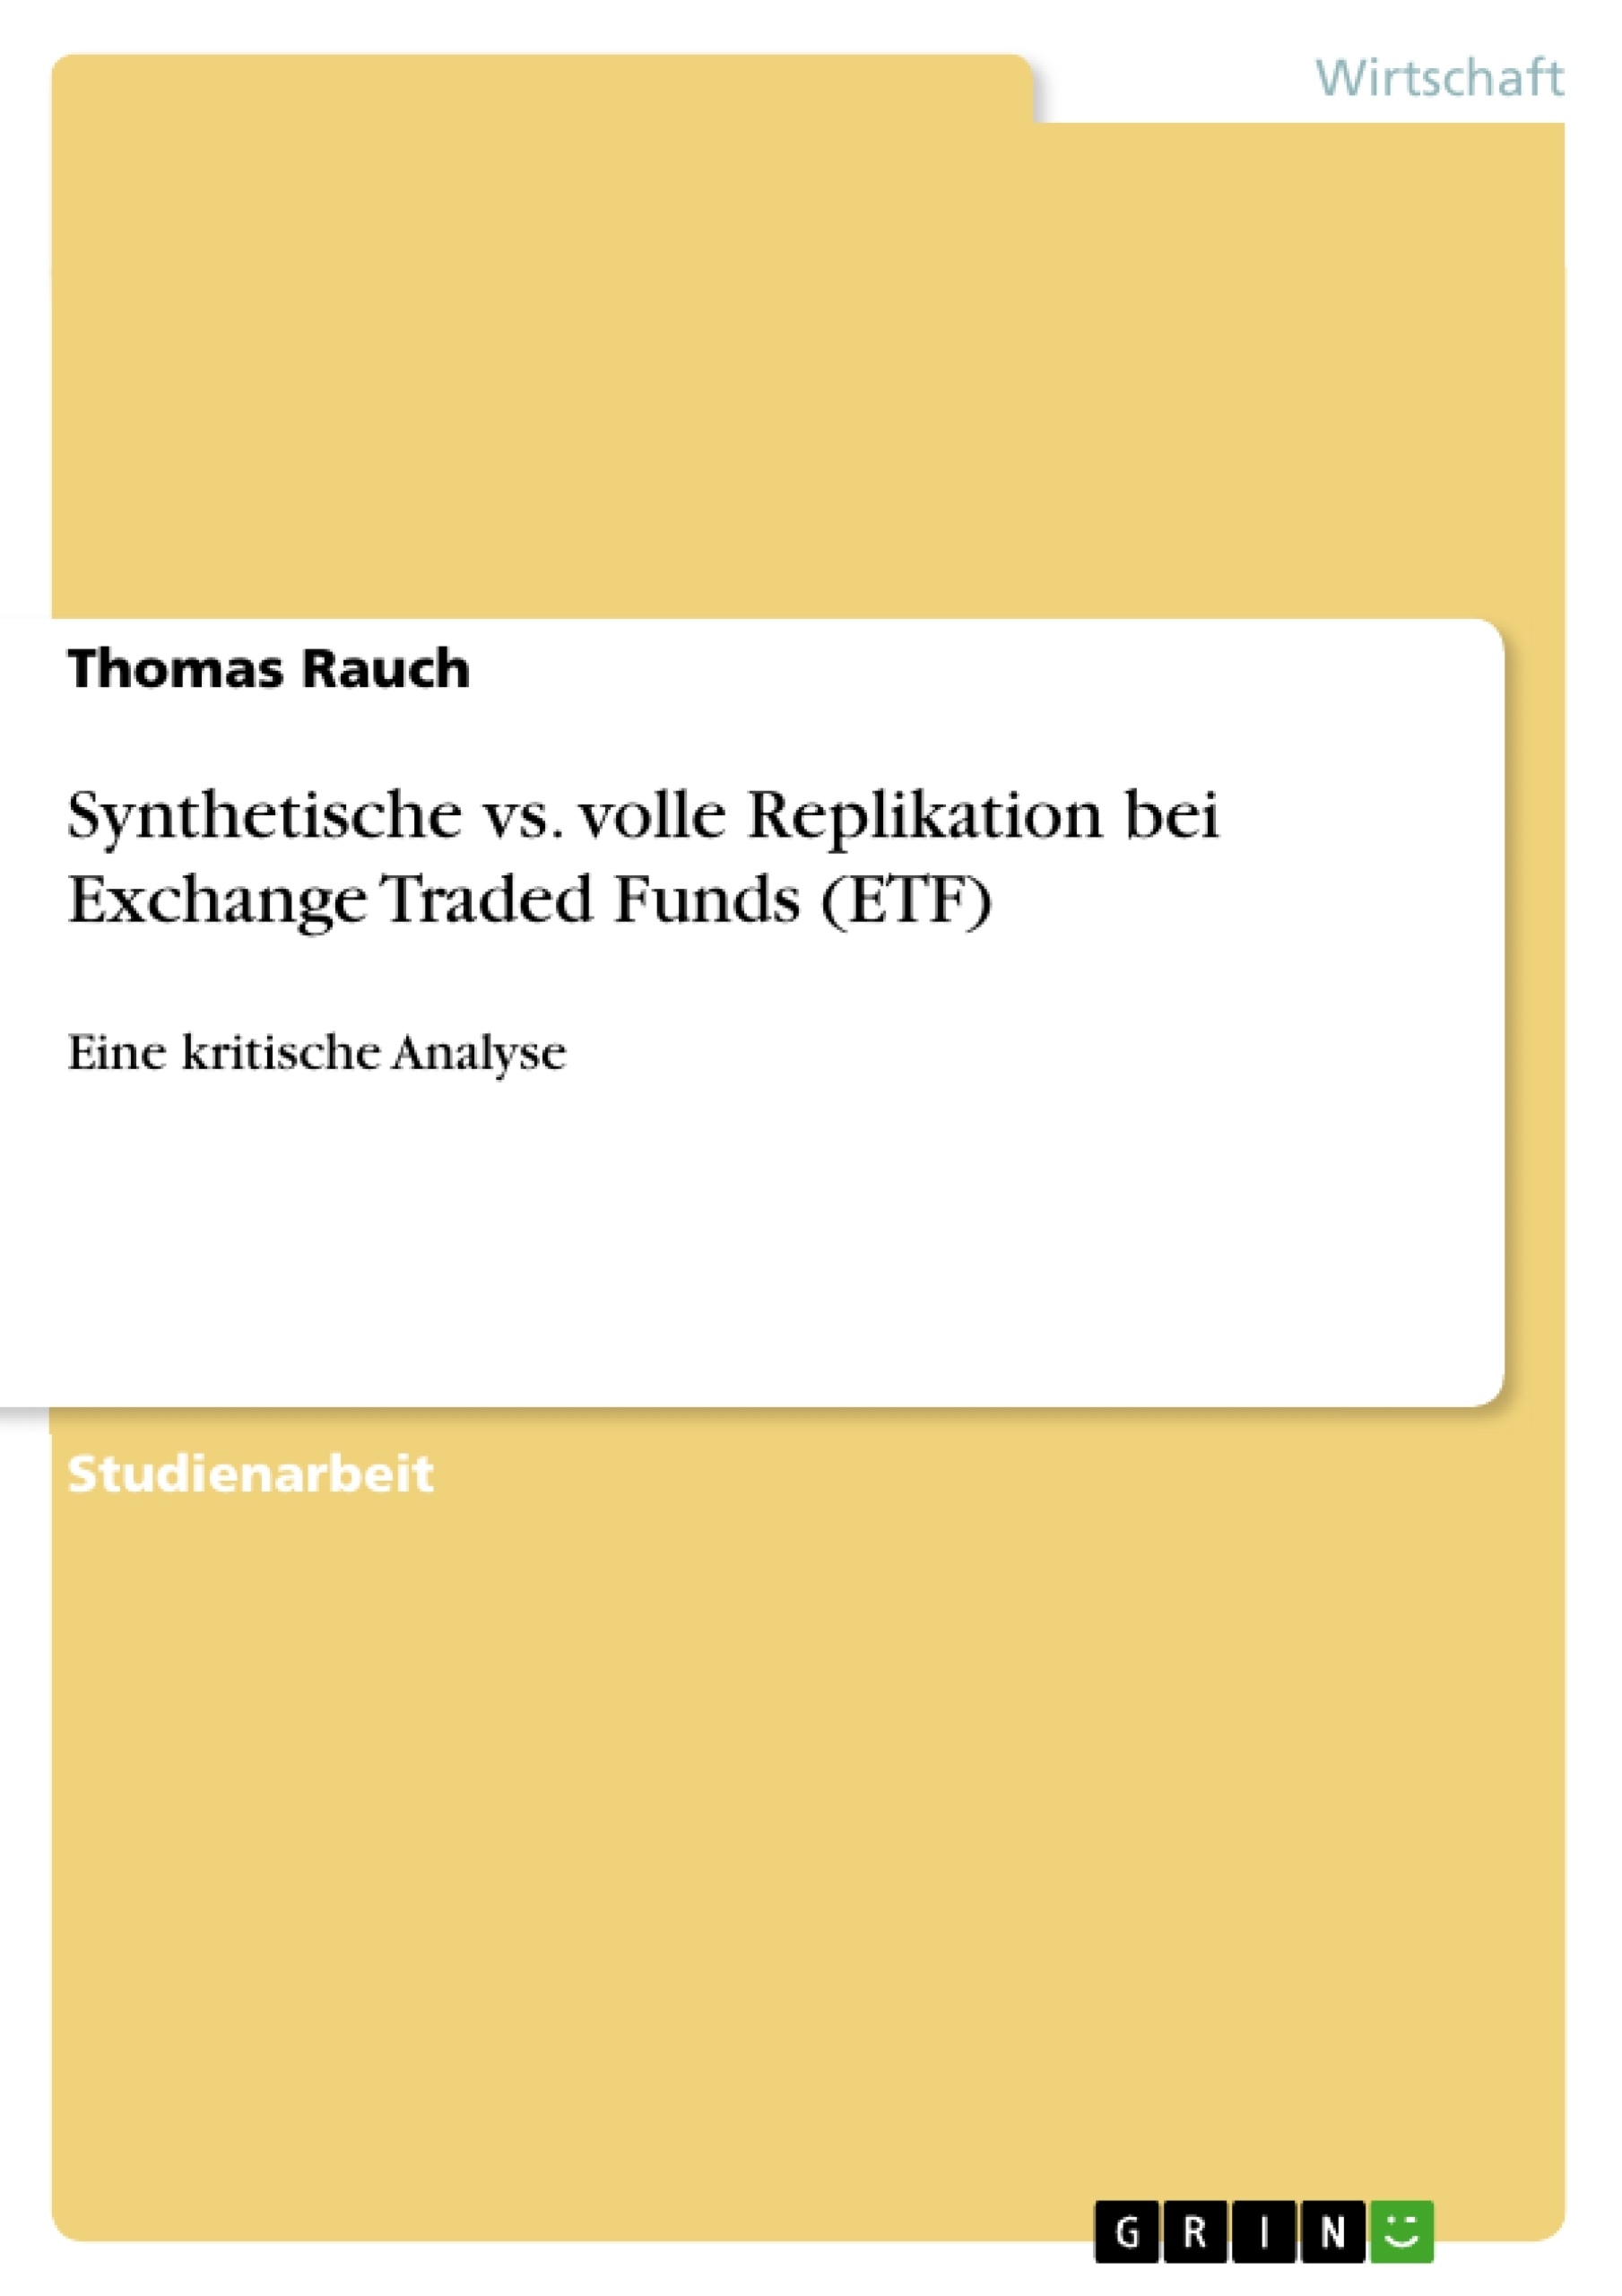 Titel: Synthetische vs. volle Replikation bei Exchange Traded Funds (ETF)